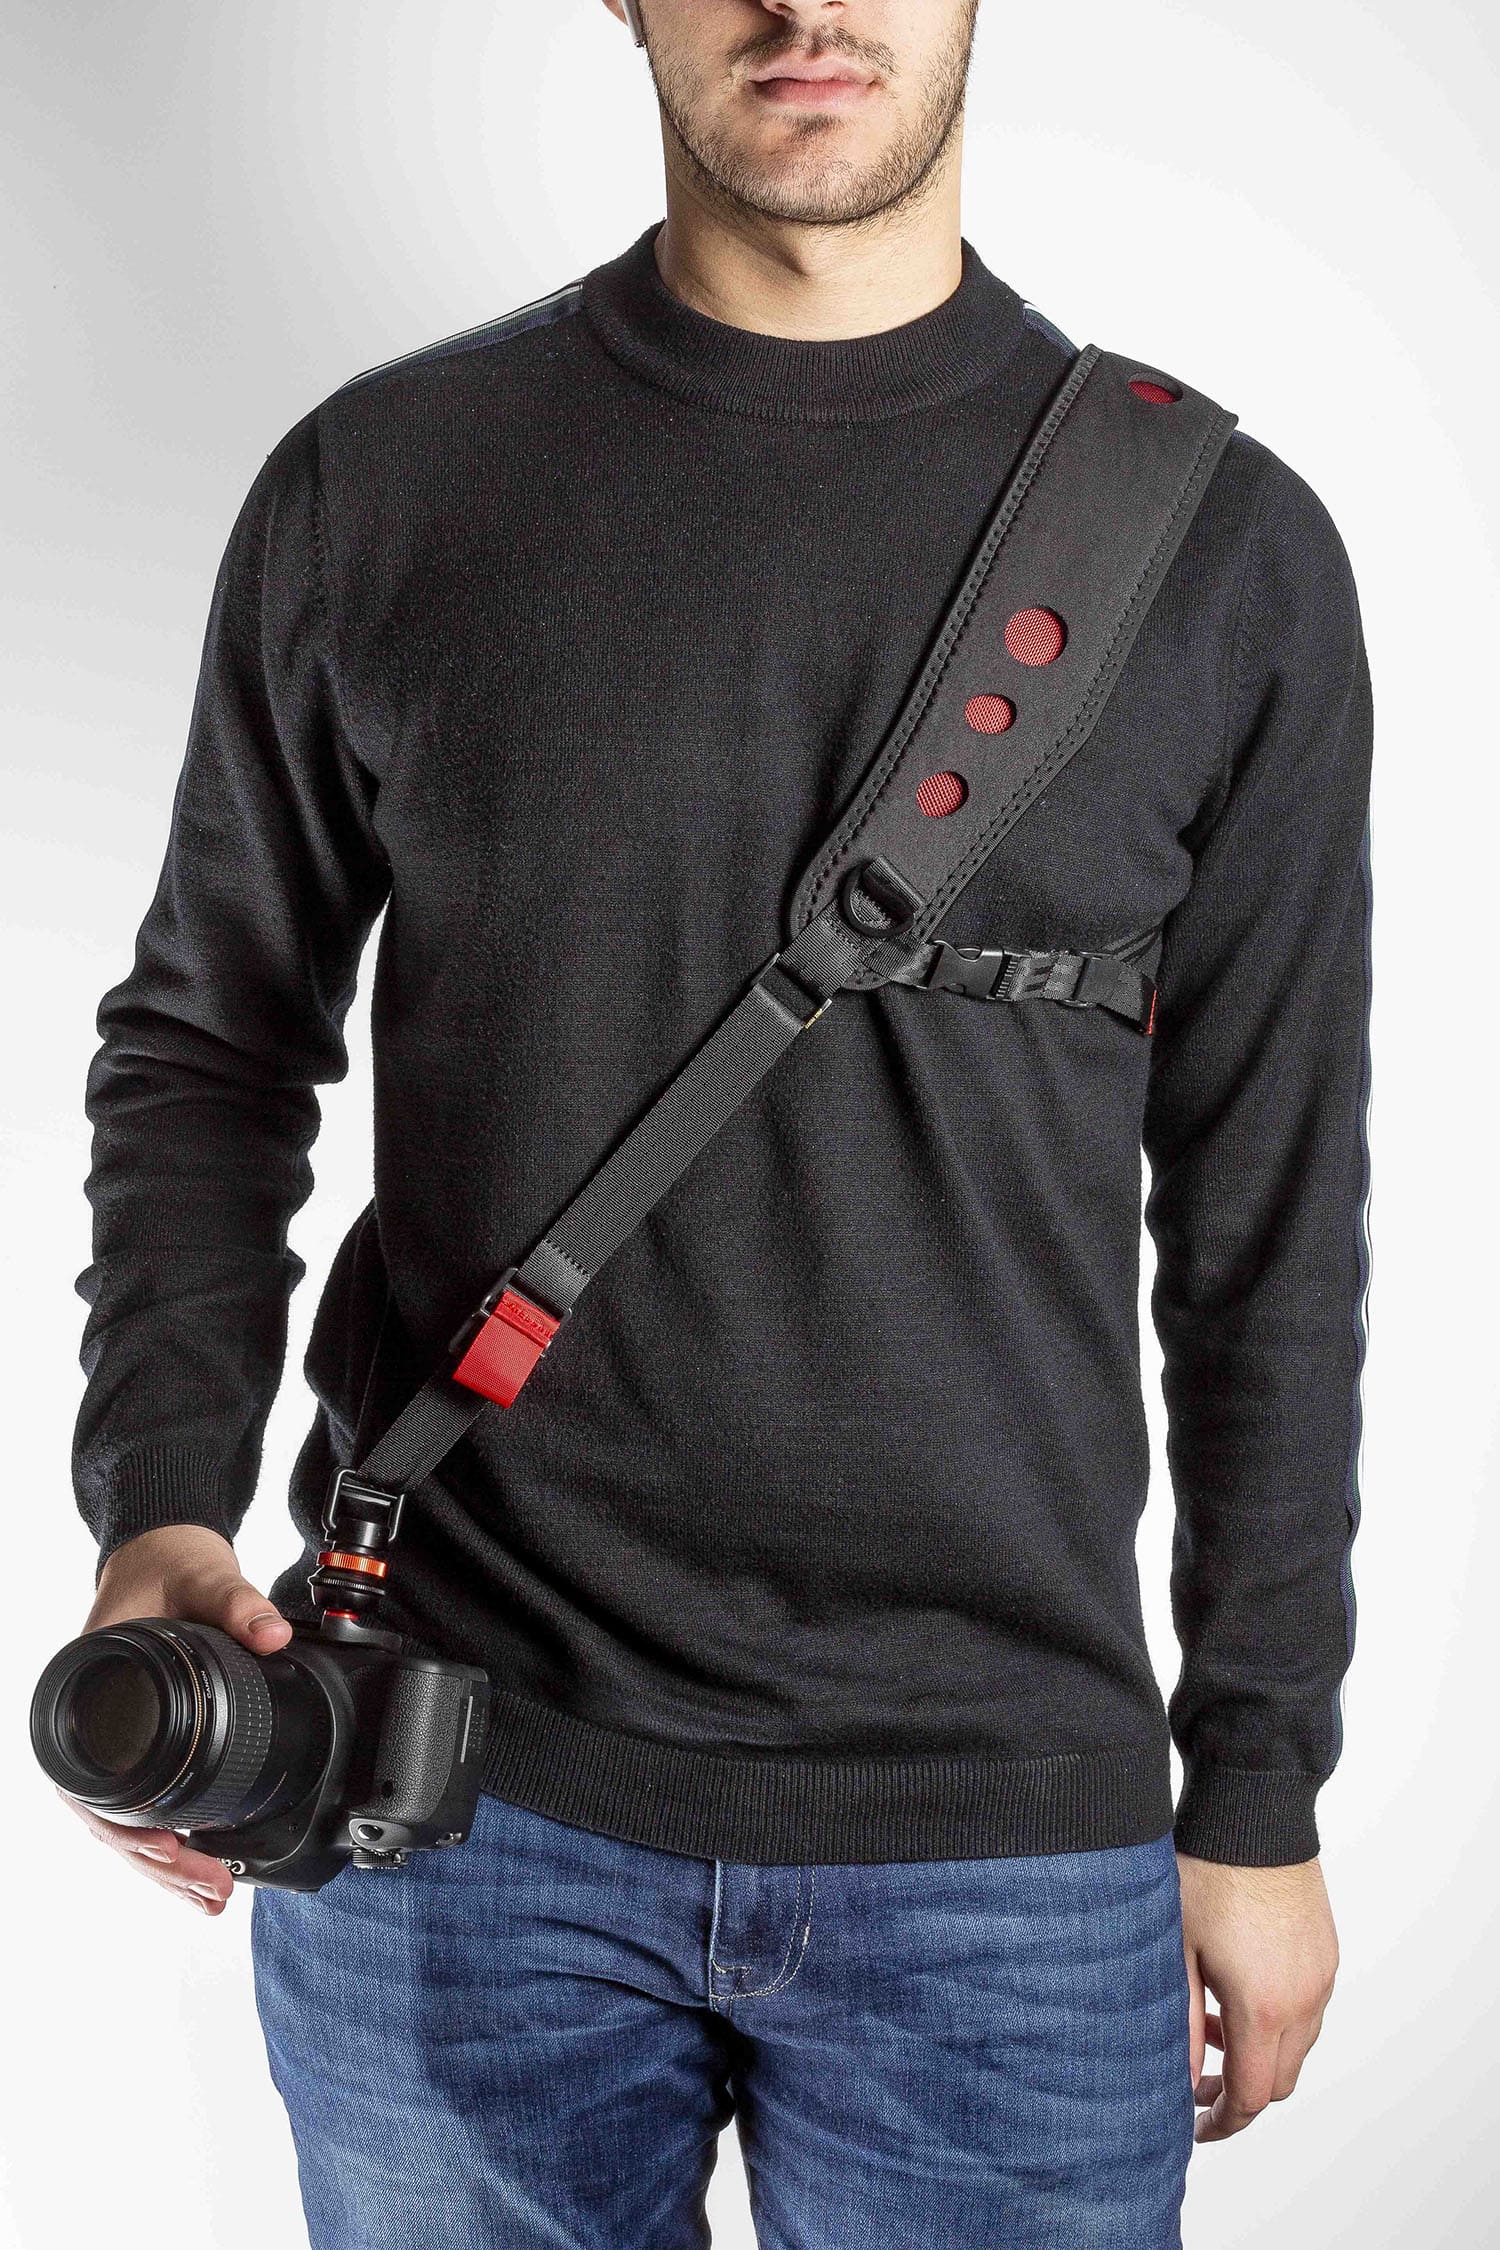 DSLR Camera Sling With Quick Release Plate